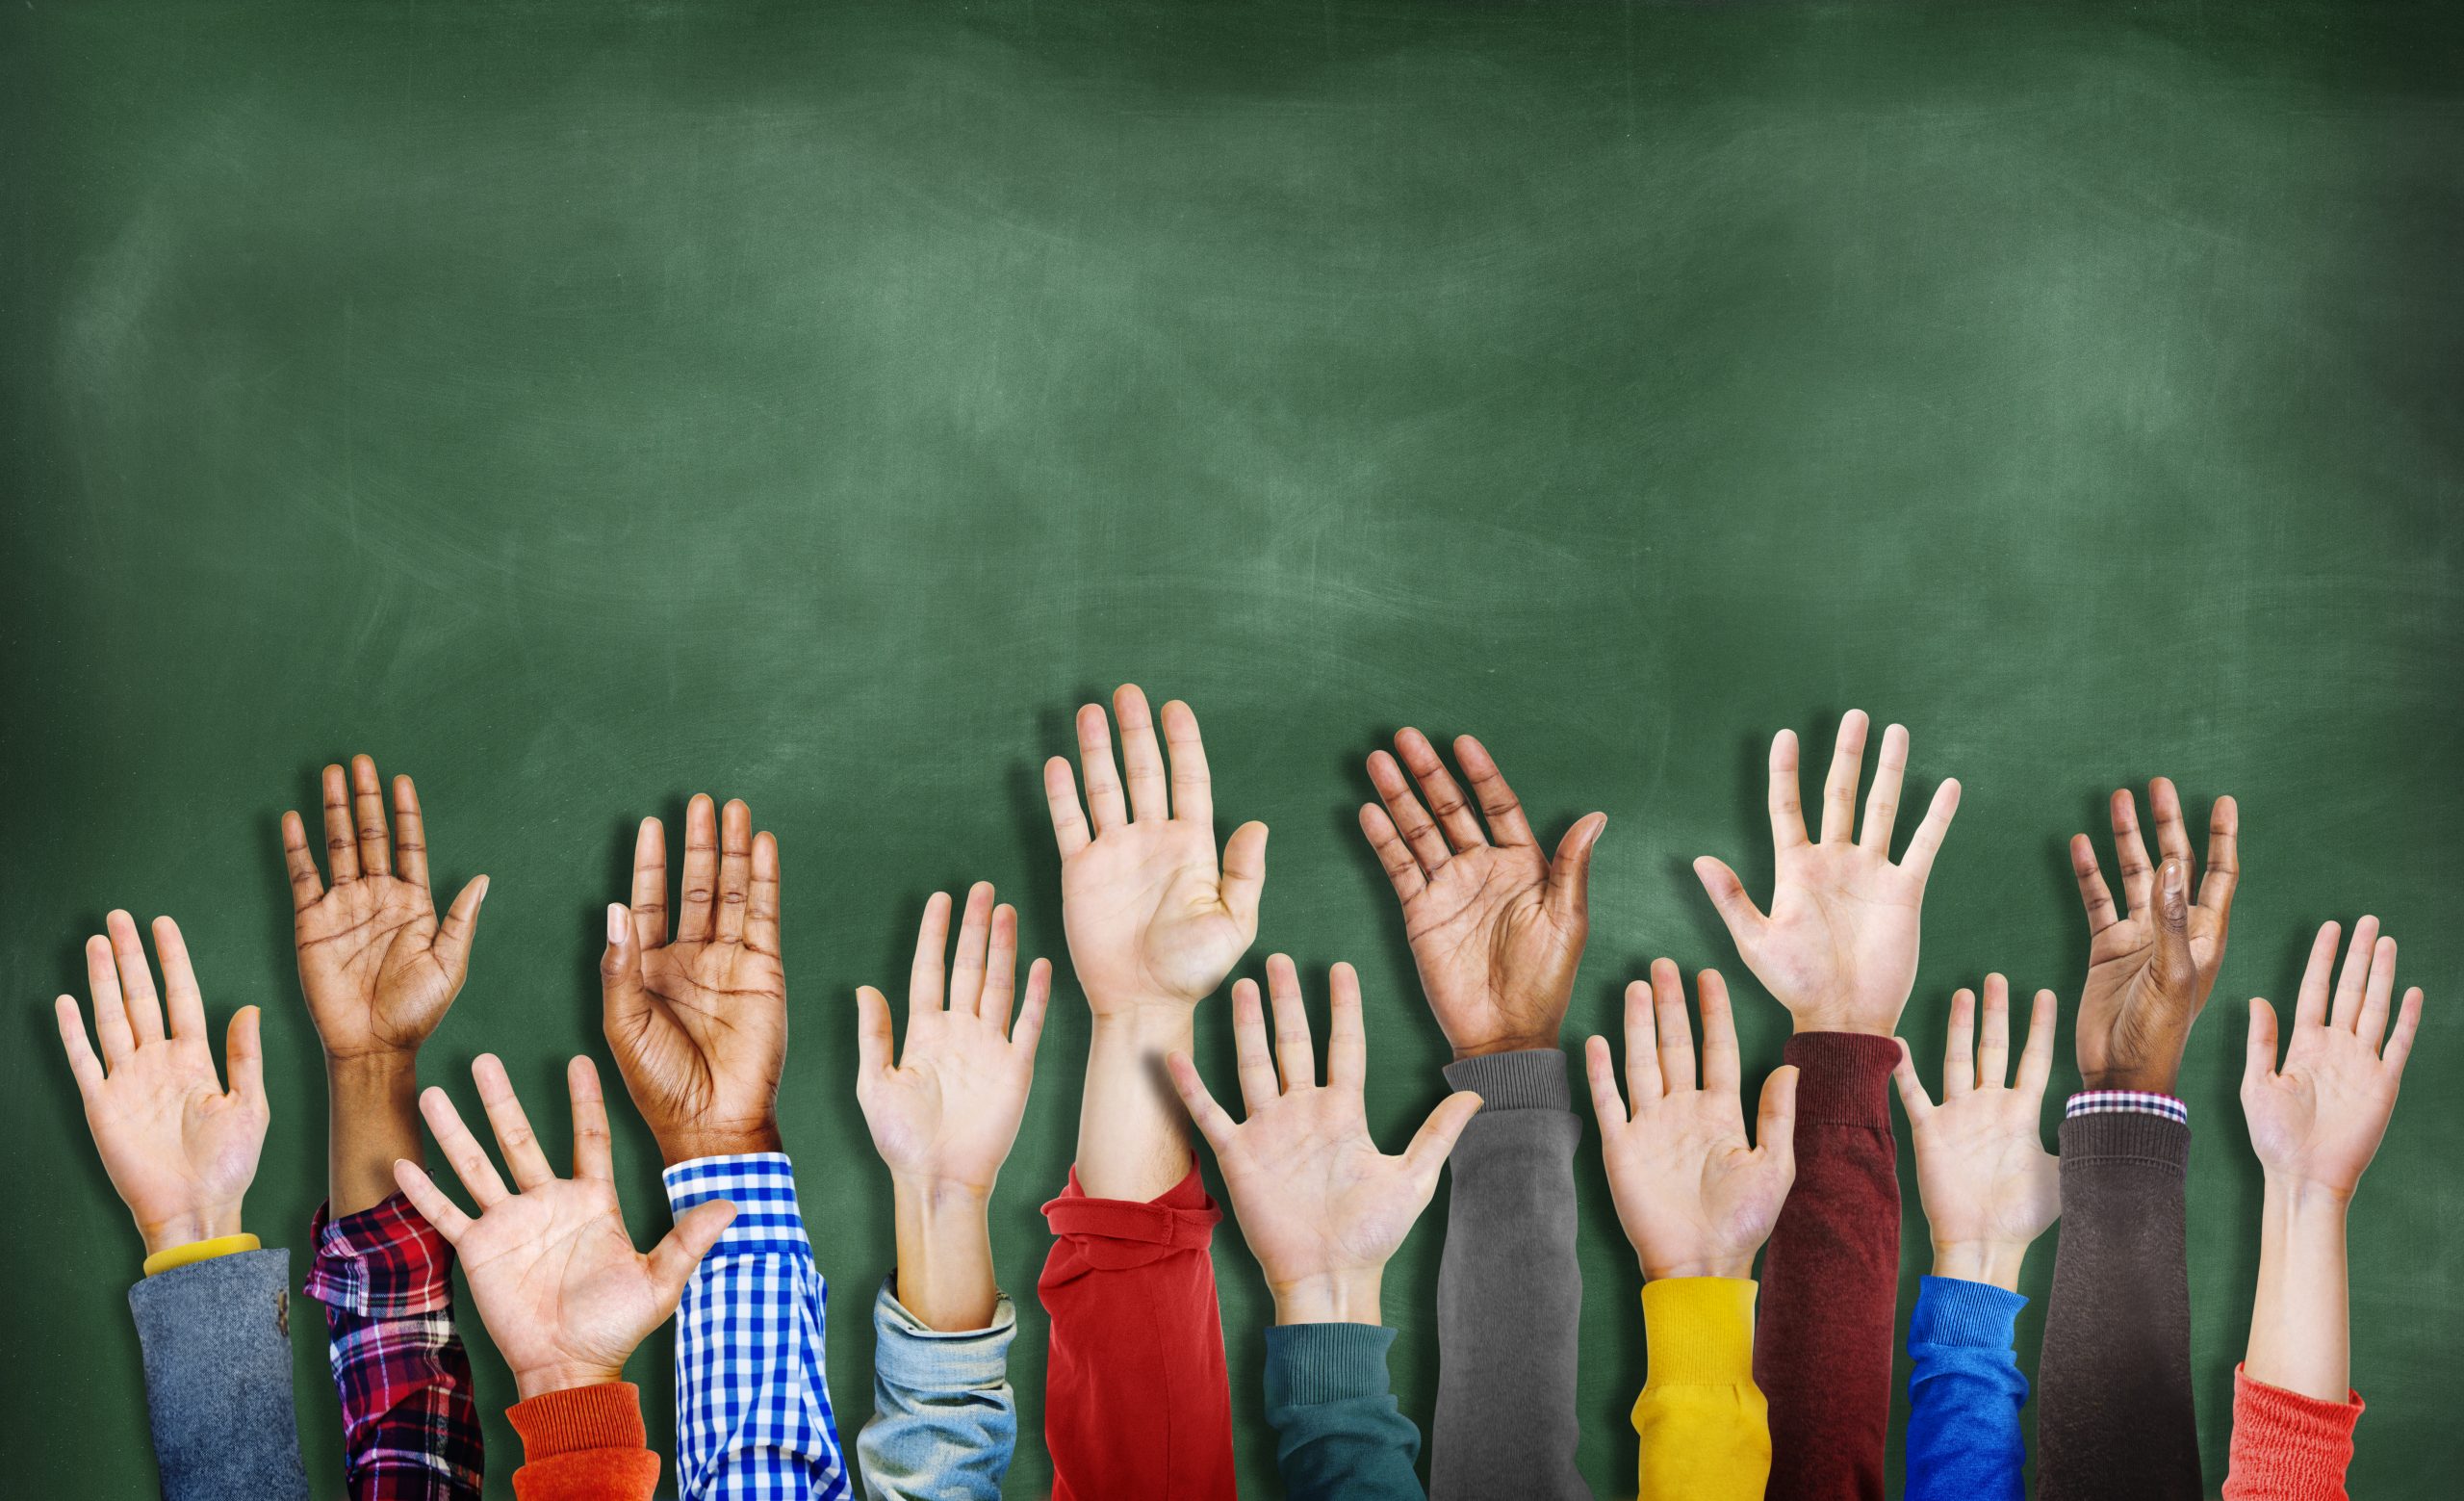 Raised hands of children in front of a chalkboard.